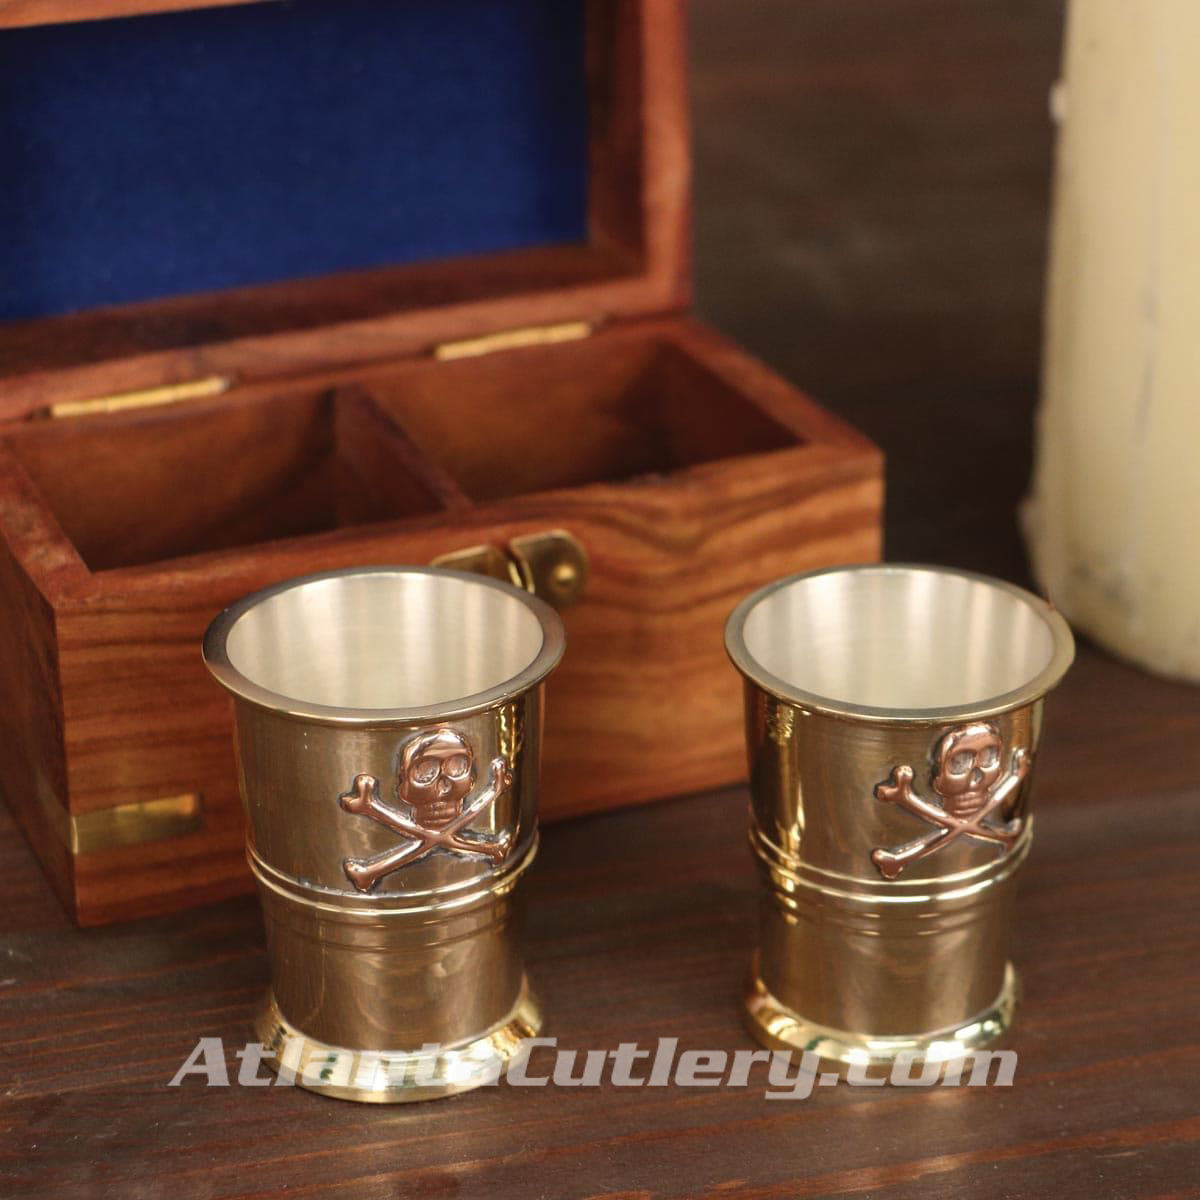 Pirate Captain Cup Shot Glasses with Wooden Storage Box